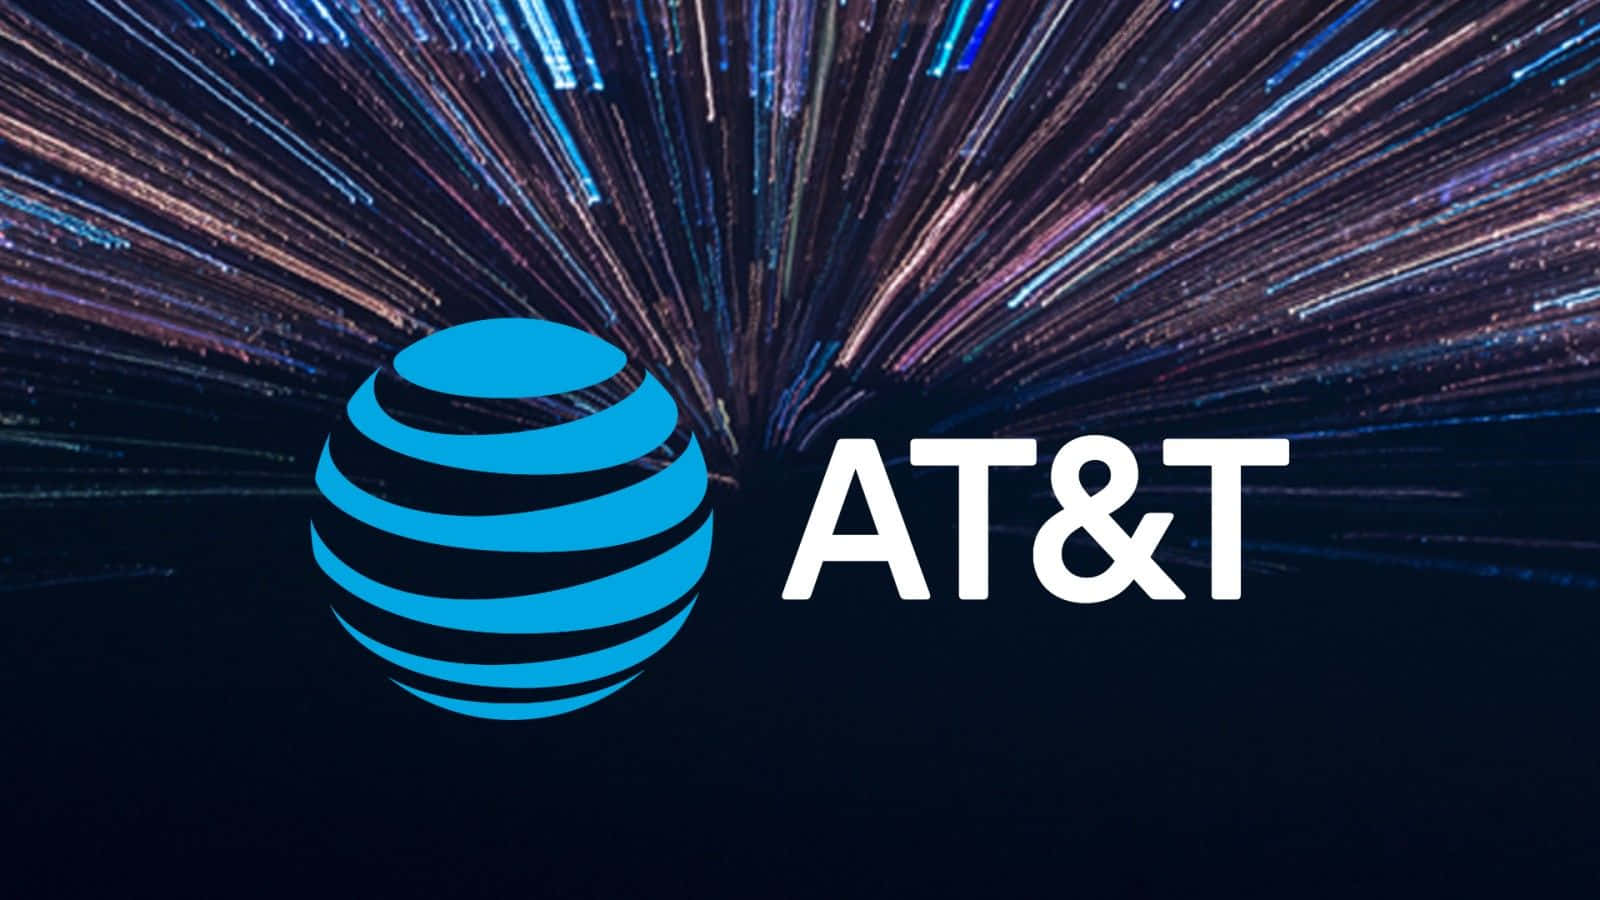 AT&T in talks with Discovery to combine media assets